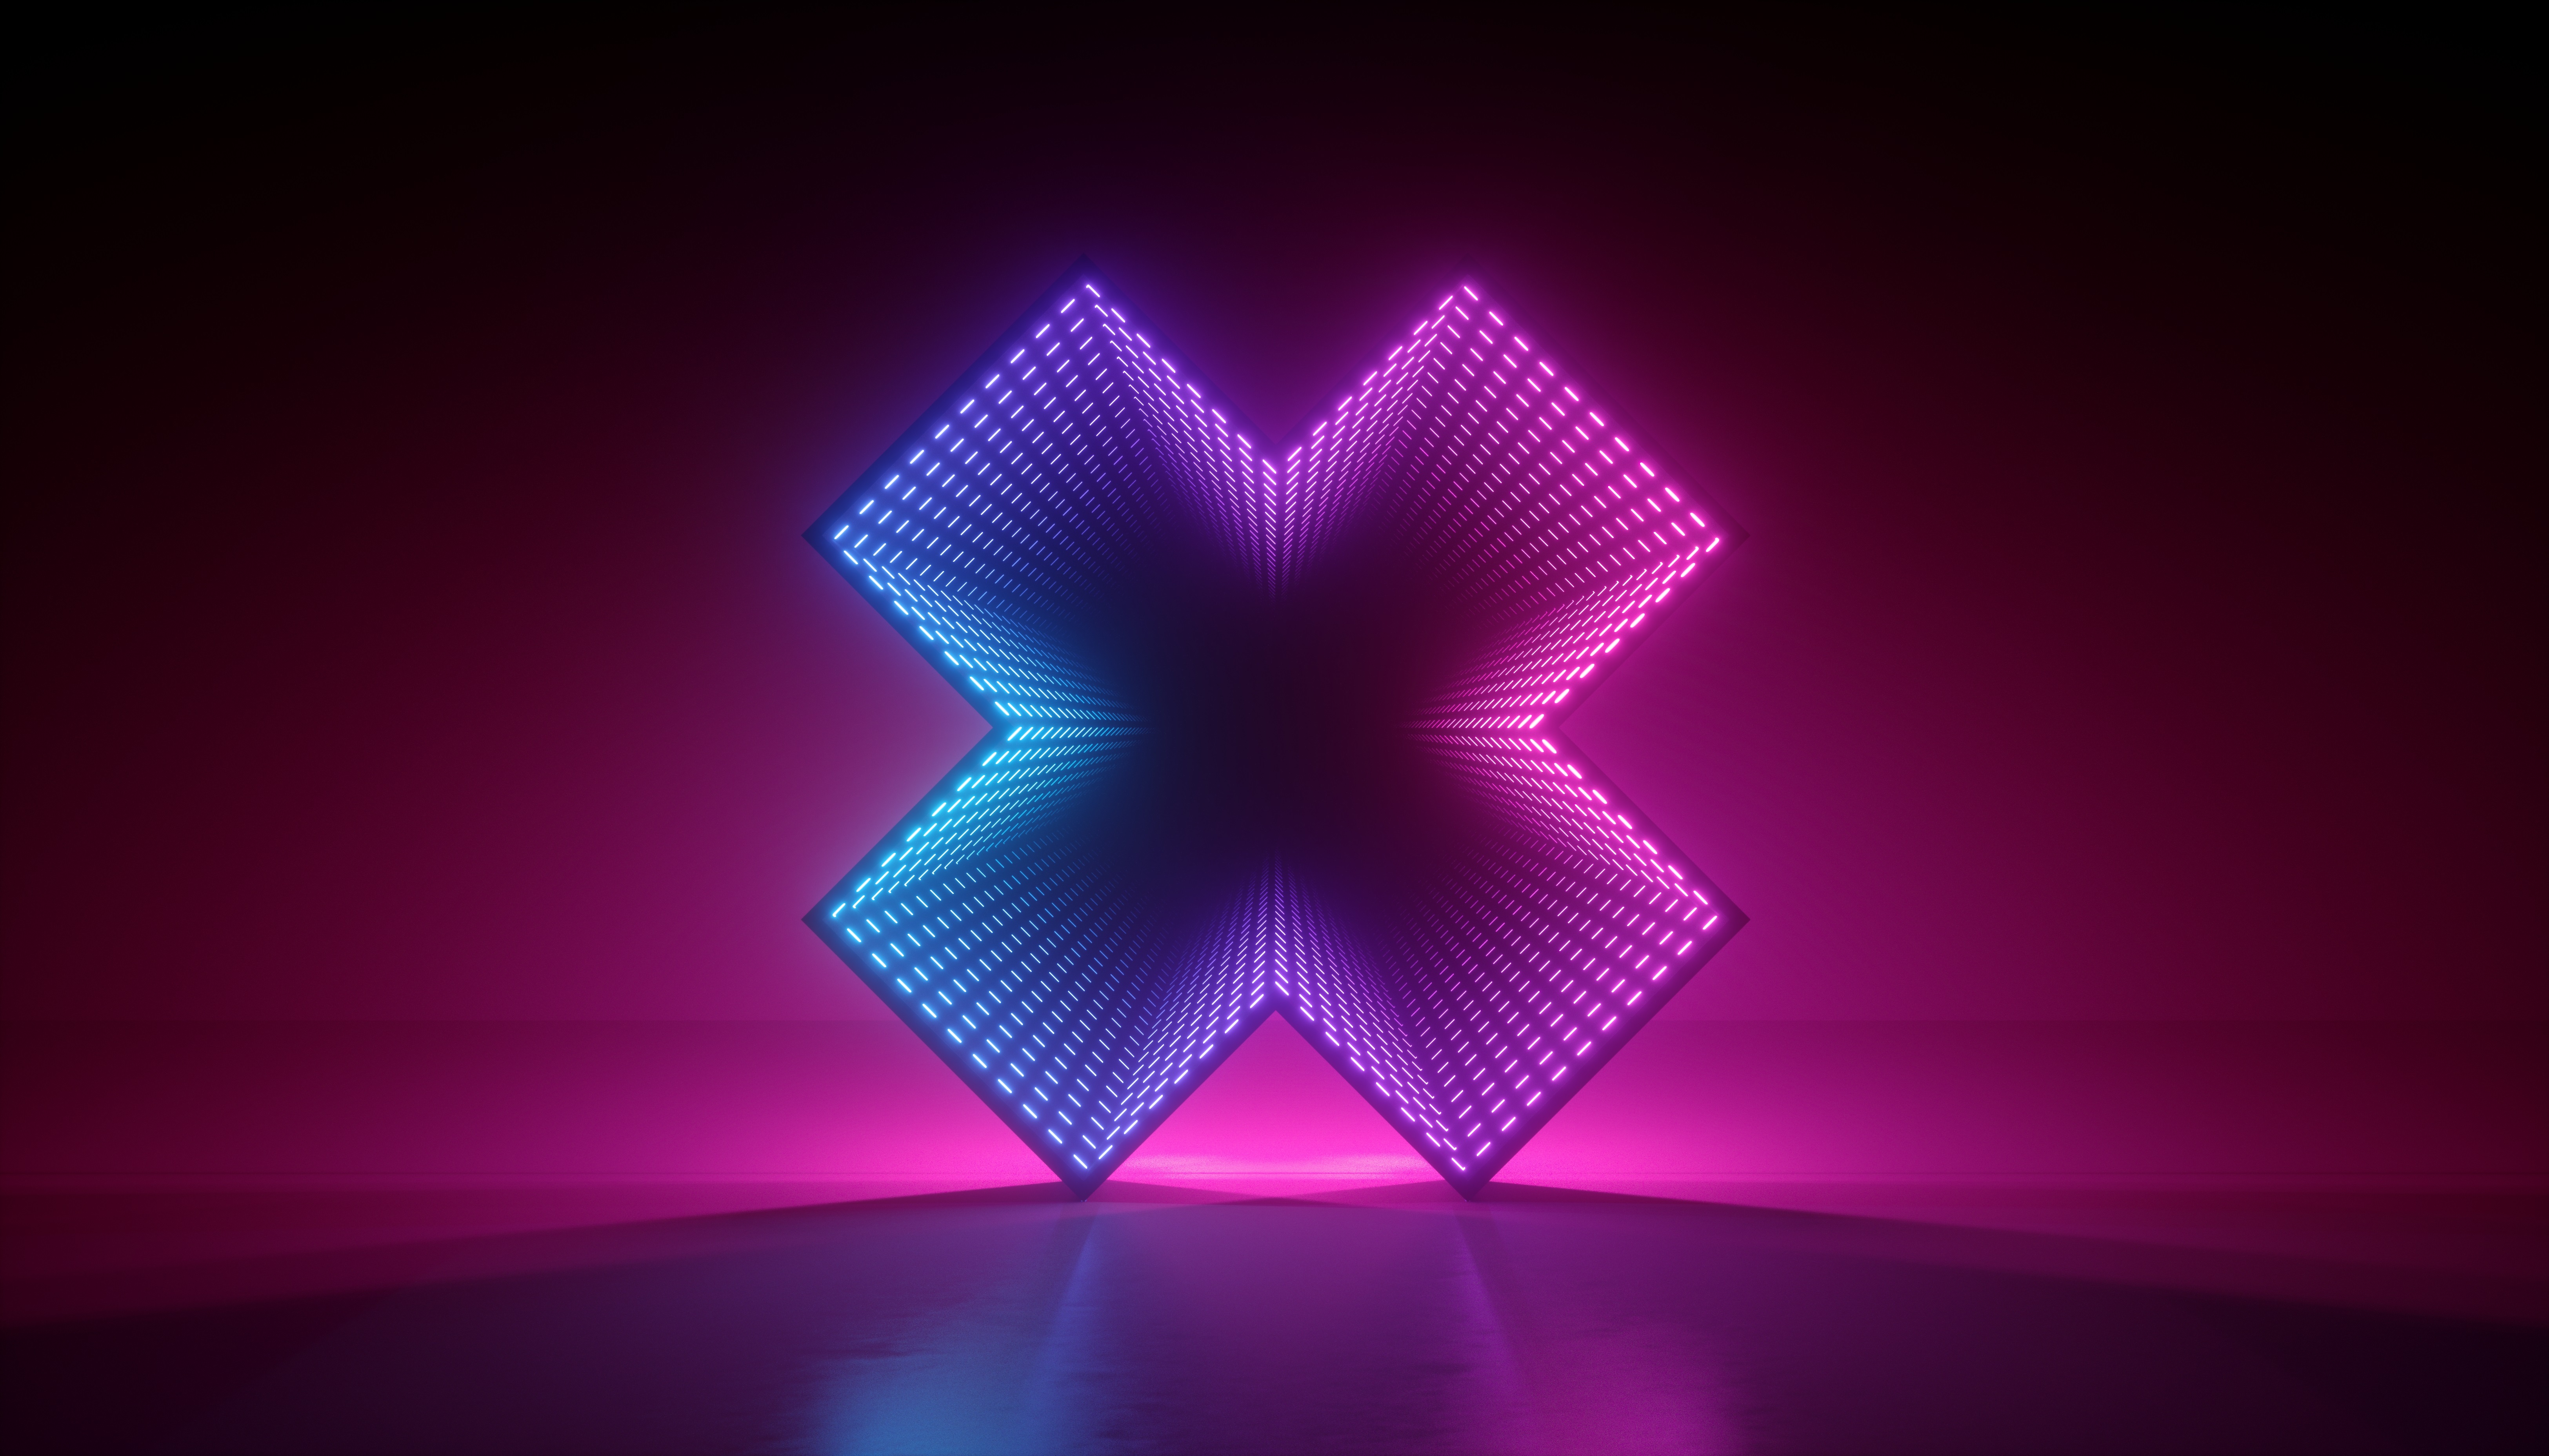 Abstract Neon Artwork Lights 3D Render Glowing Gradient Shapes Minimalism Pink Blue 6500x3714